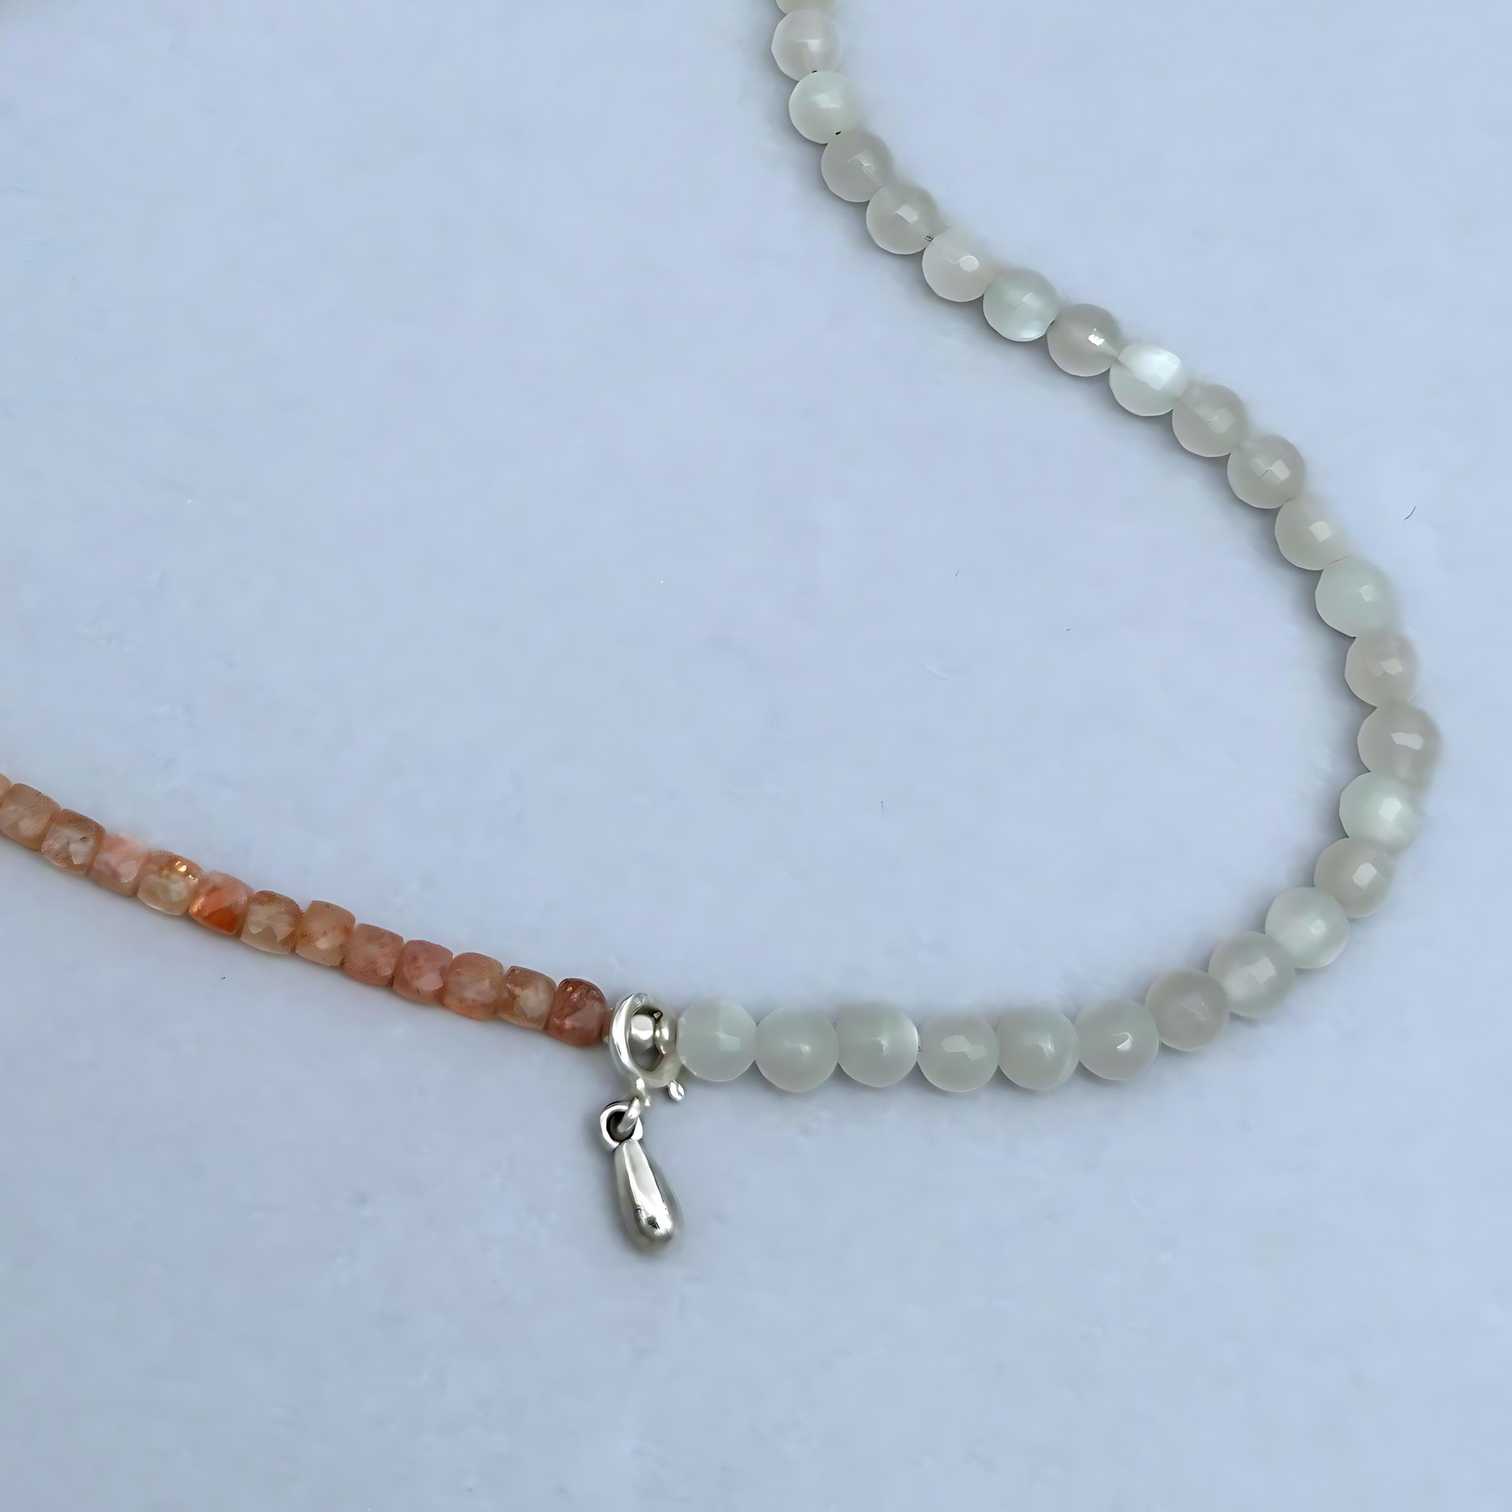 The soft feminine energy of Moonstones combined with the joyful vibes of Sunstone and the motivating powers of Labradorite gives this necklace a unique aura. Detail